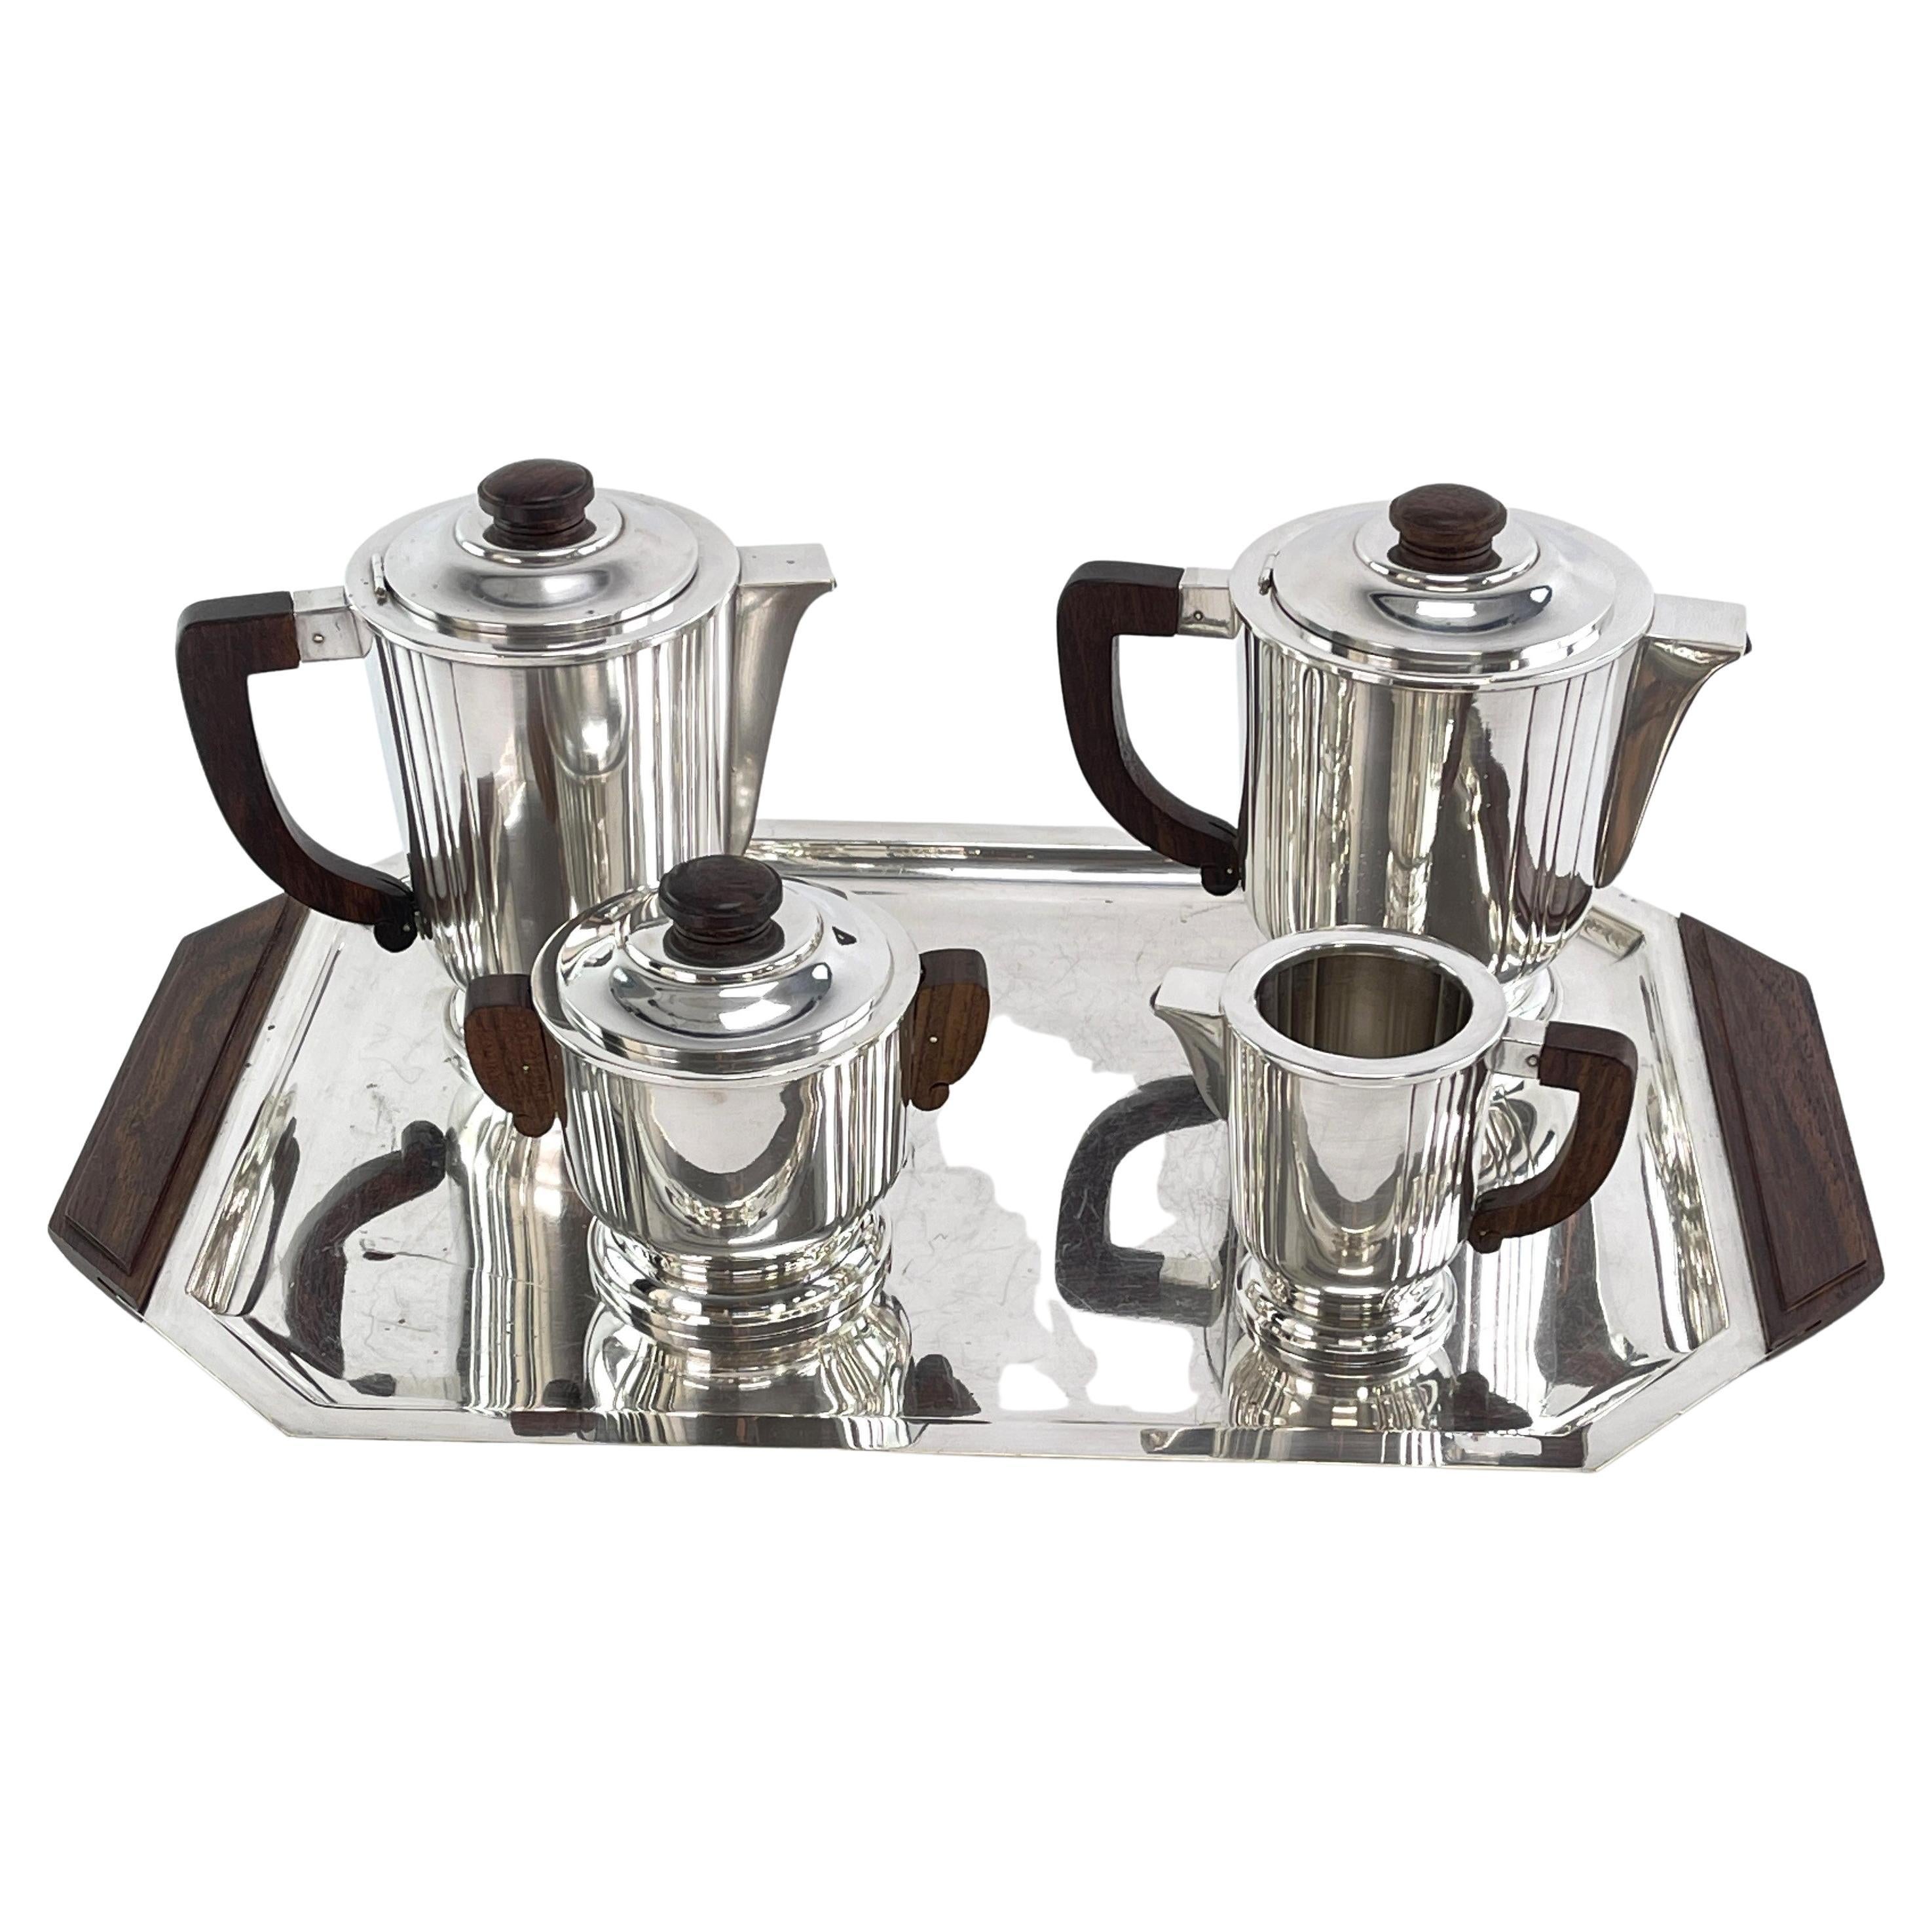 Art Deco Silver Plated Coffee Set, 1920s